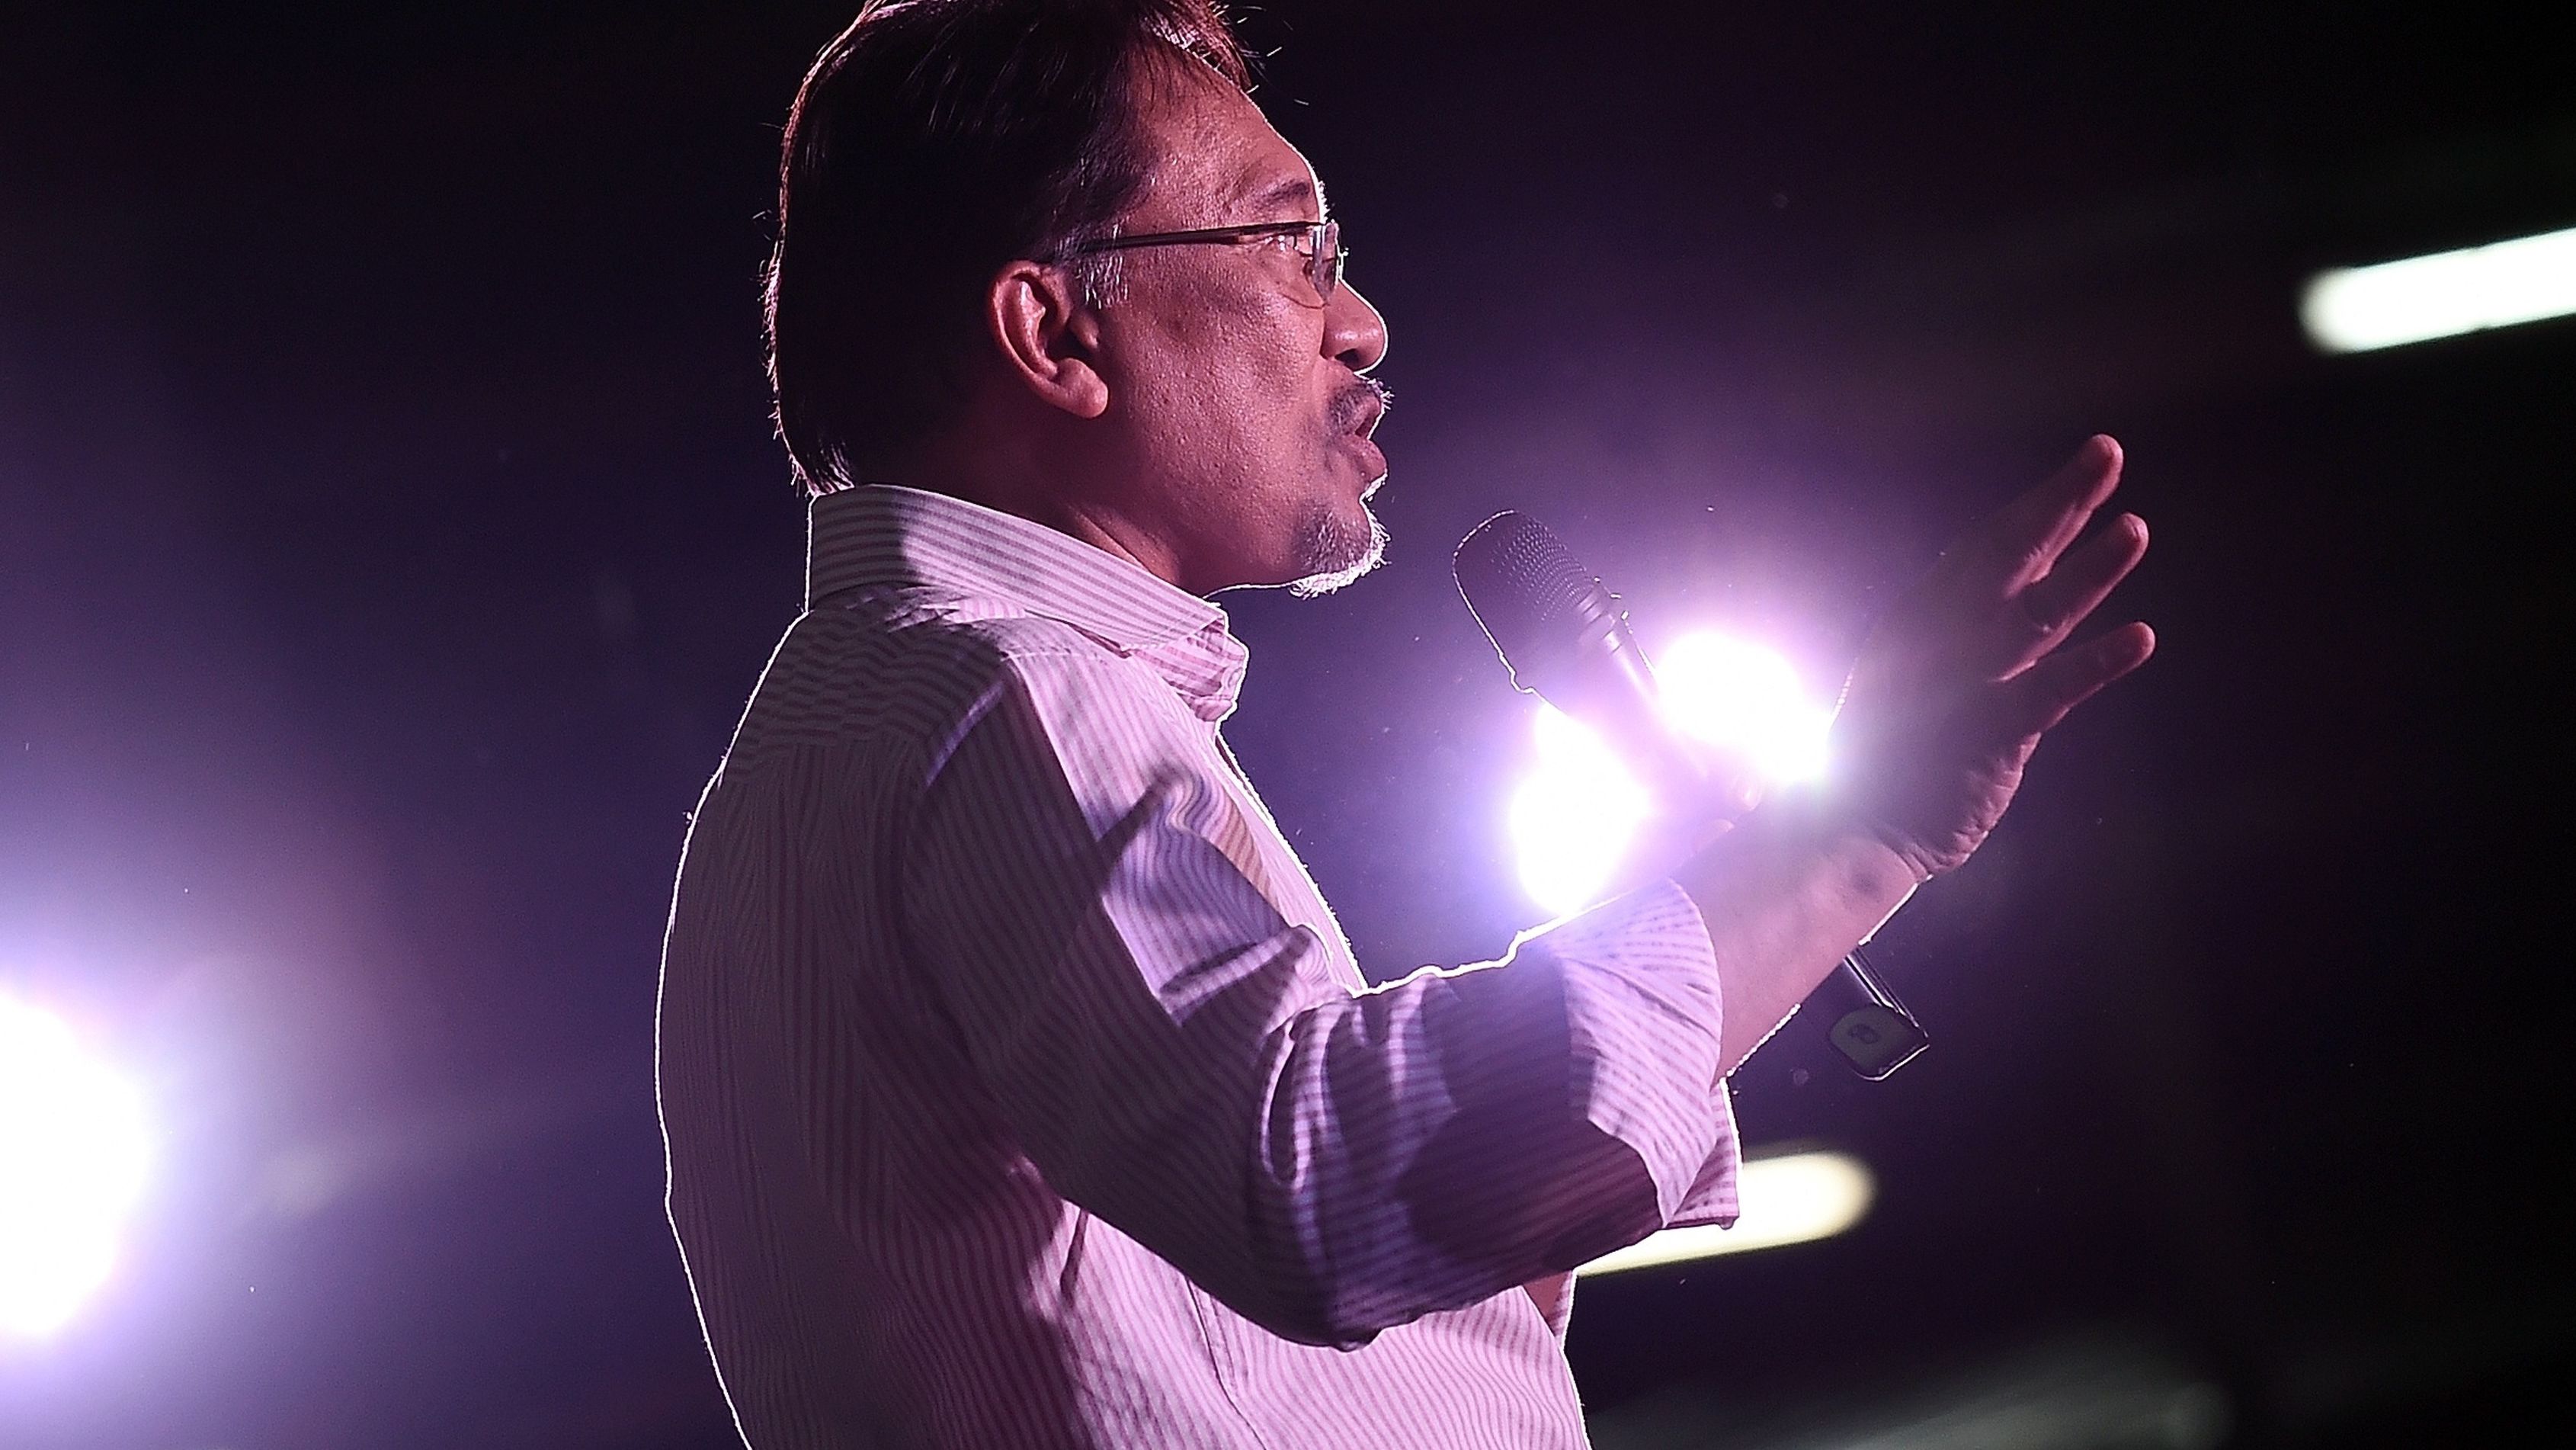 Opposition leader Anwar Ibrahim addresses his supporters at a gathering in Kuala Lumpur on February 9.